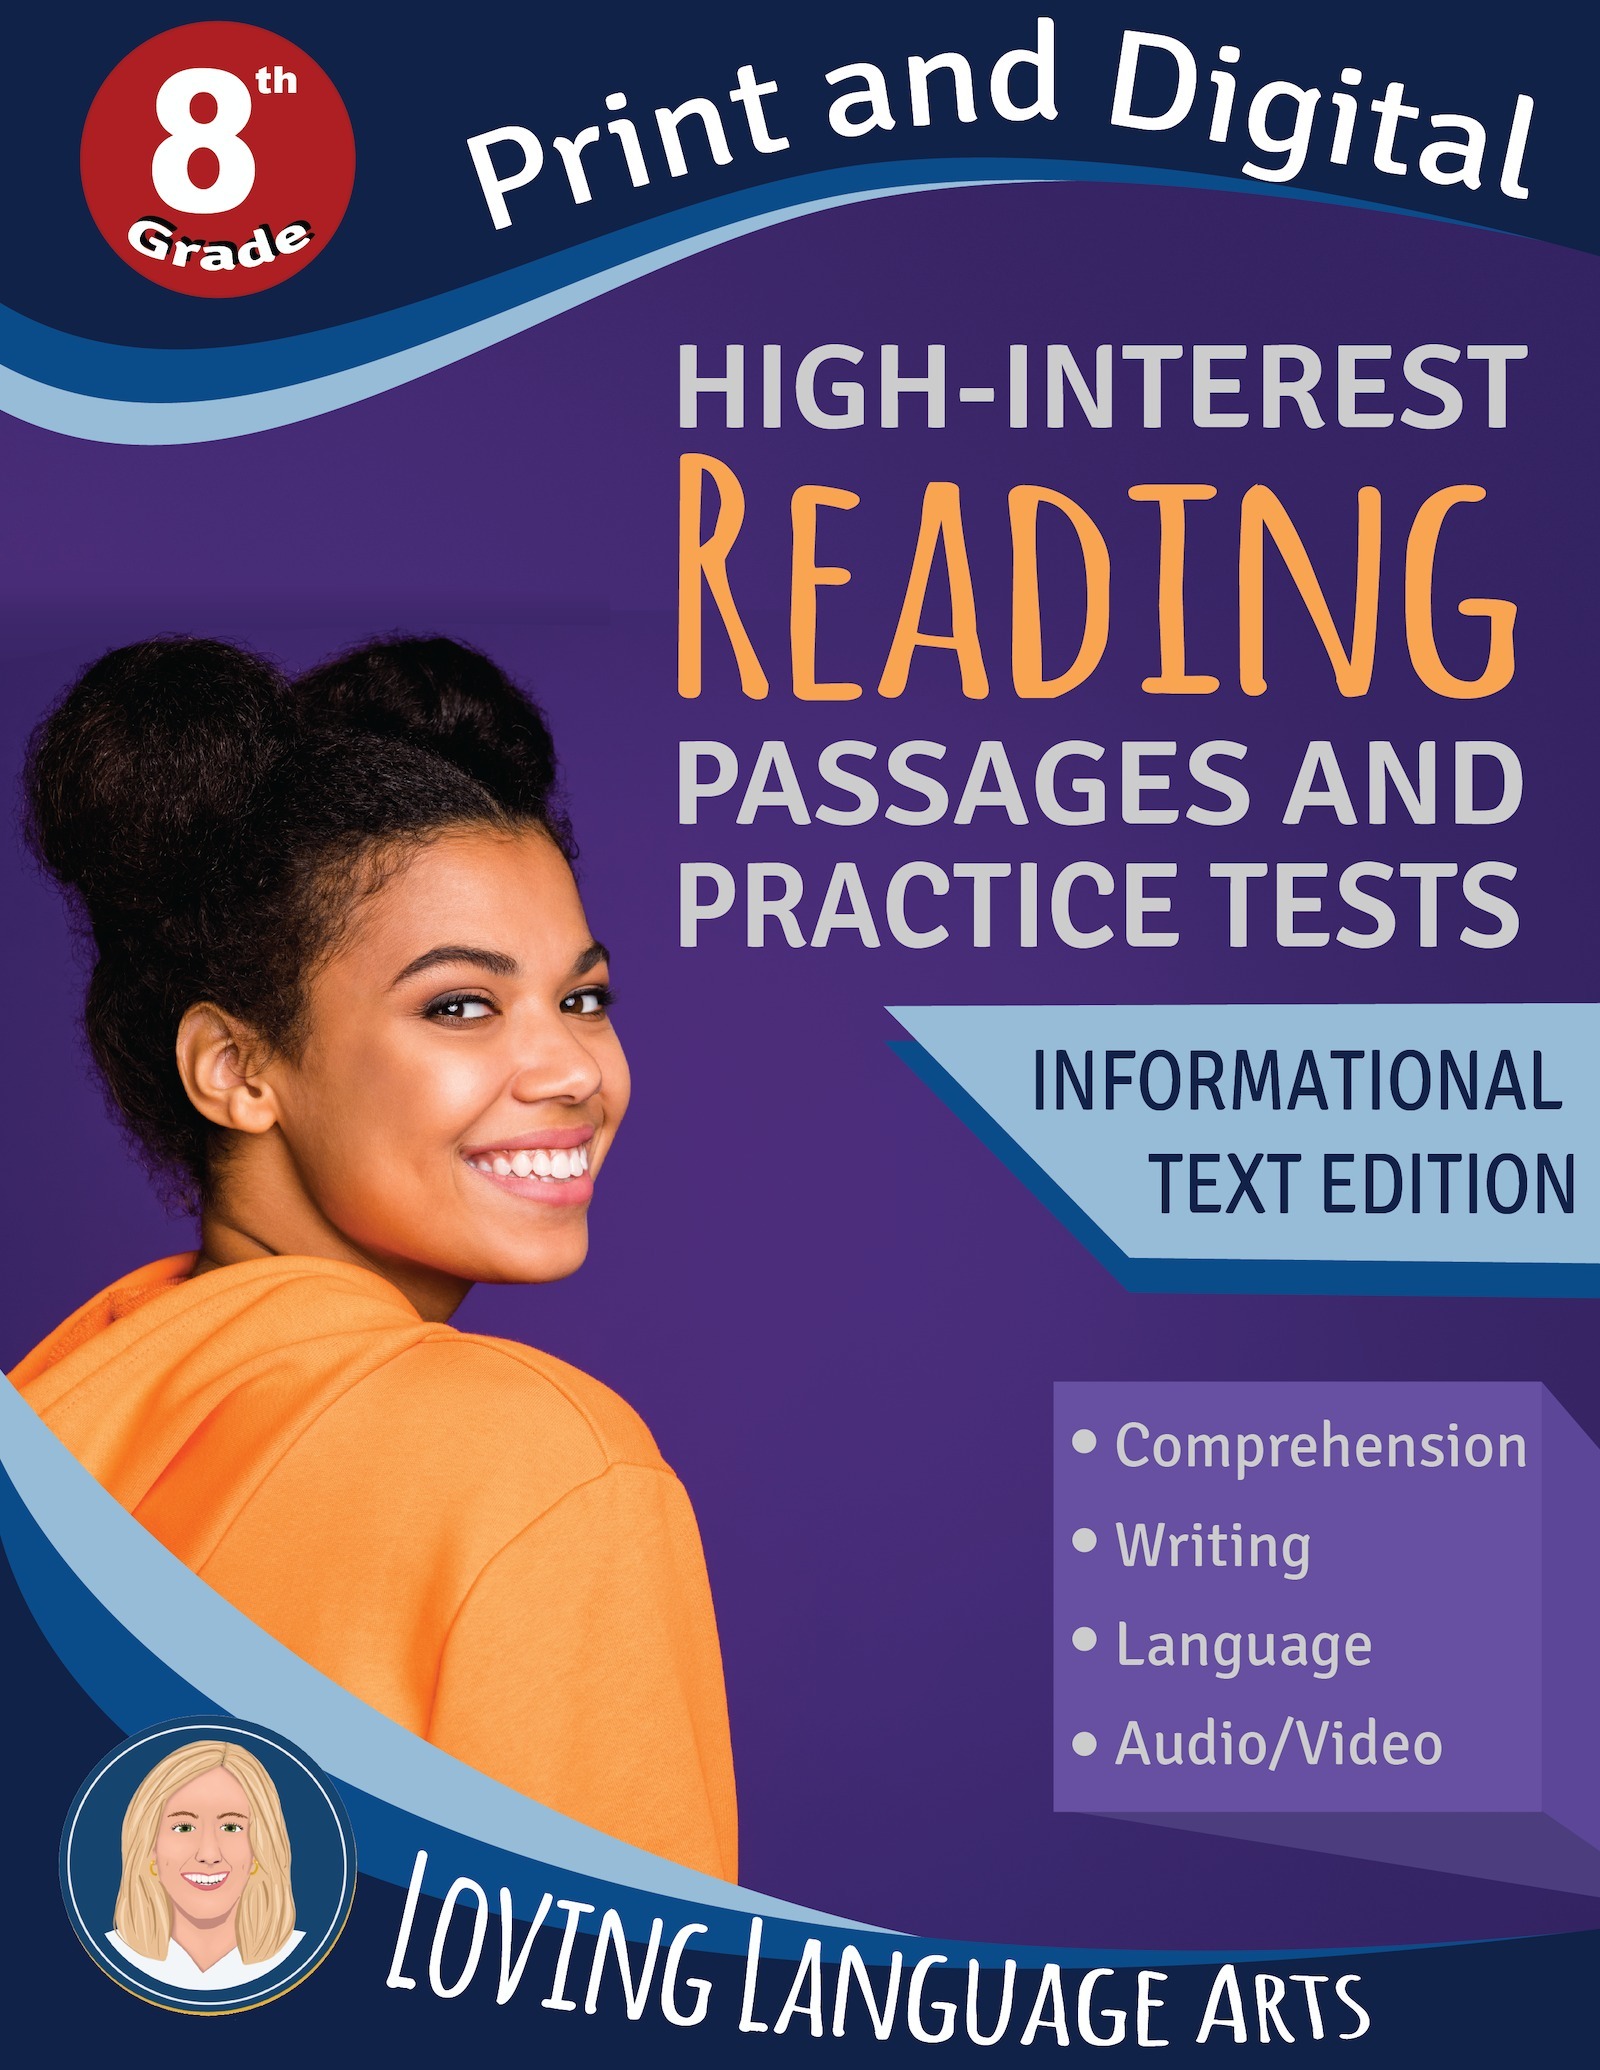 8th grade language arts workbook - High-interest passages and practice tests.